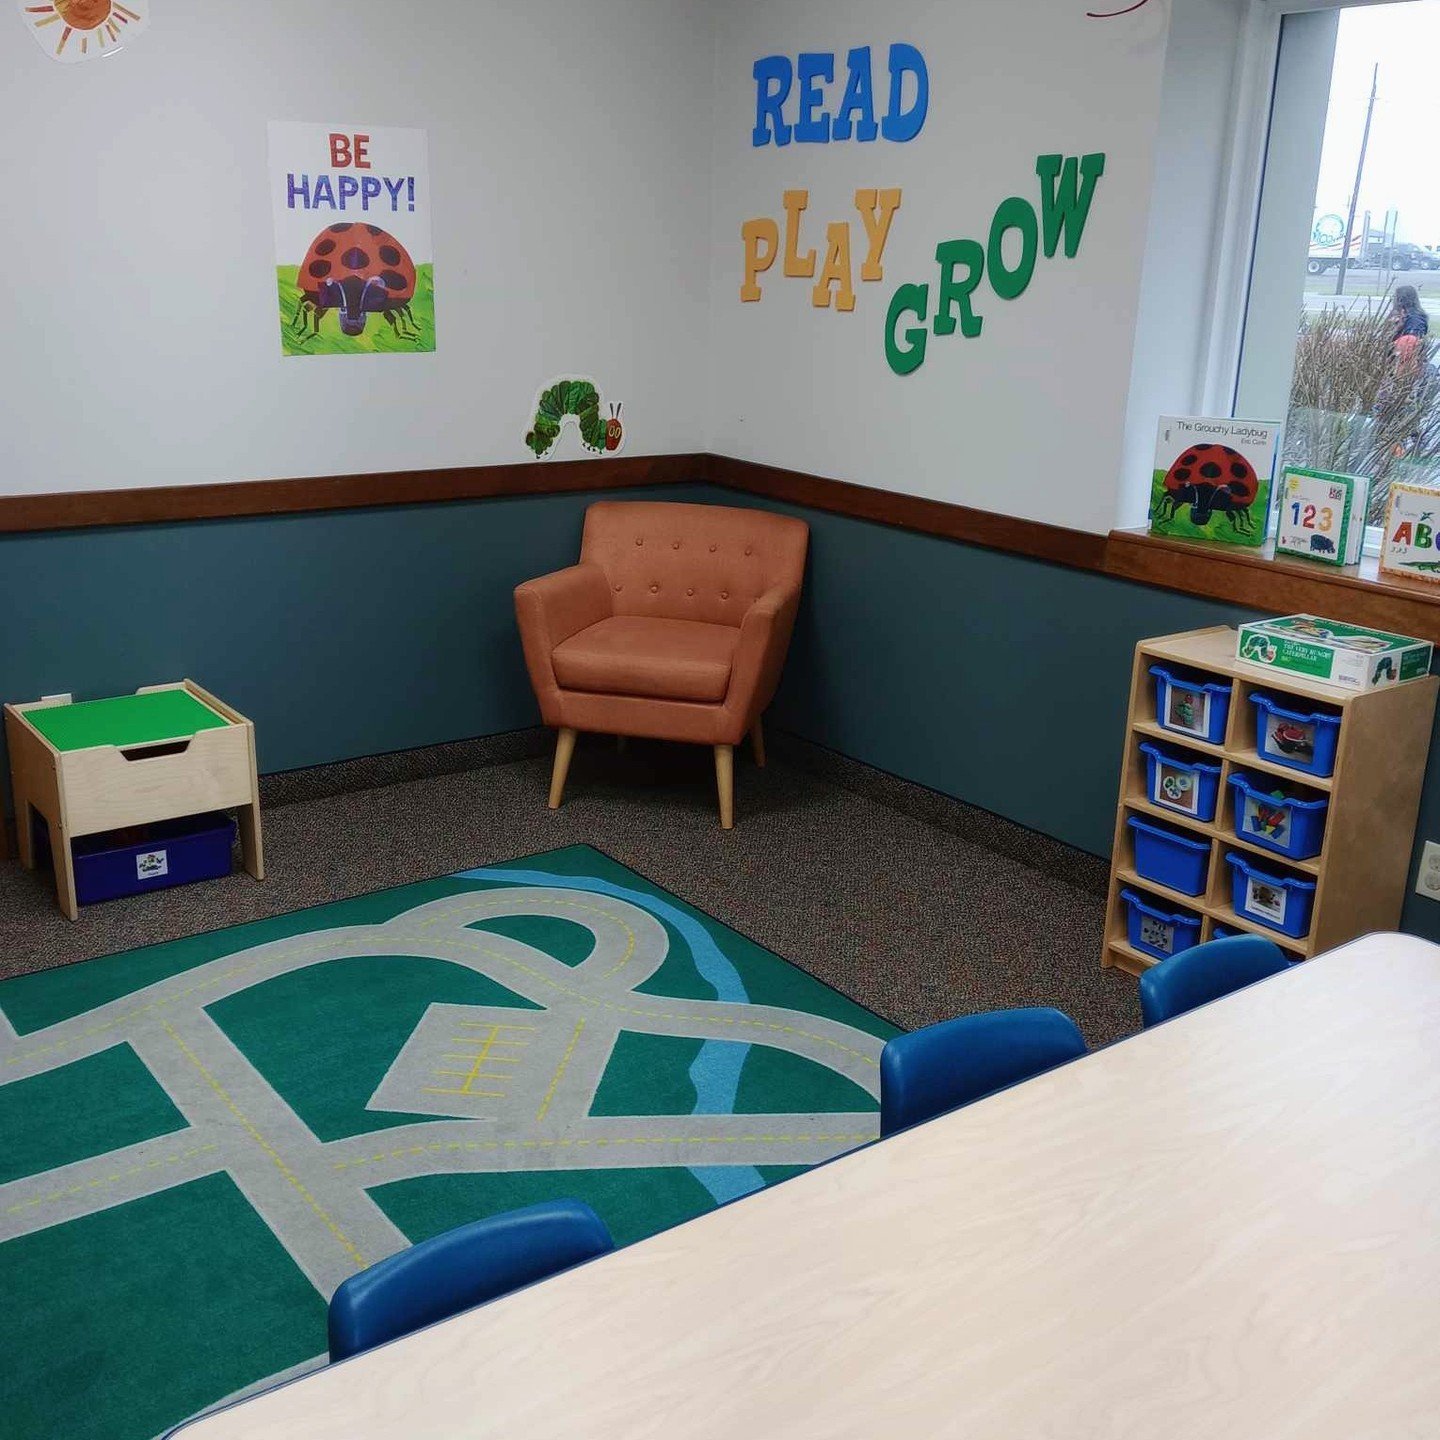 Have you stopped by to check out the kids classroom this month? 🐛🐞

Don't forget next week we will be having story time! Wednesday April 24th from 10:00-10:45 A.M. We hope to see you there!

#kidsclassroom #childrensclassroom #springclassroom #toyr